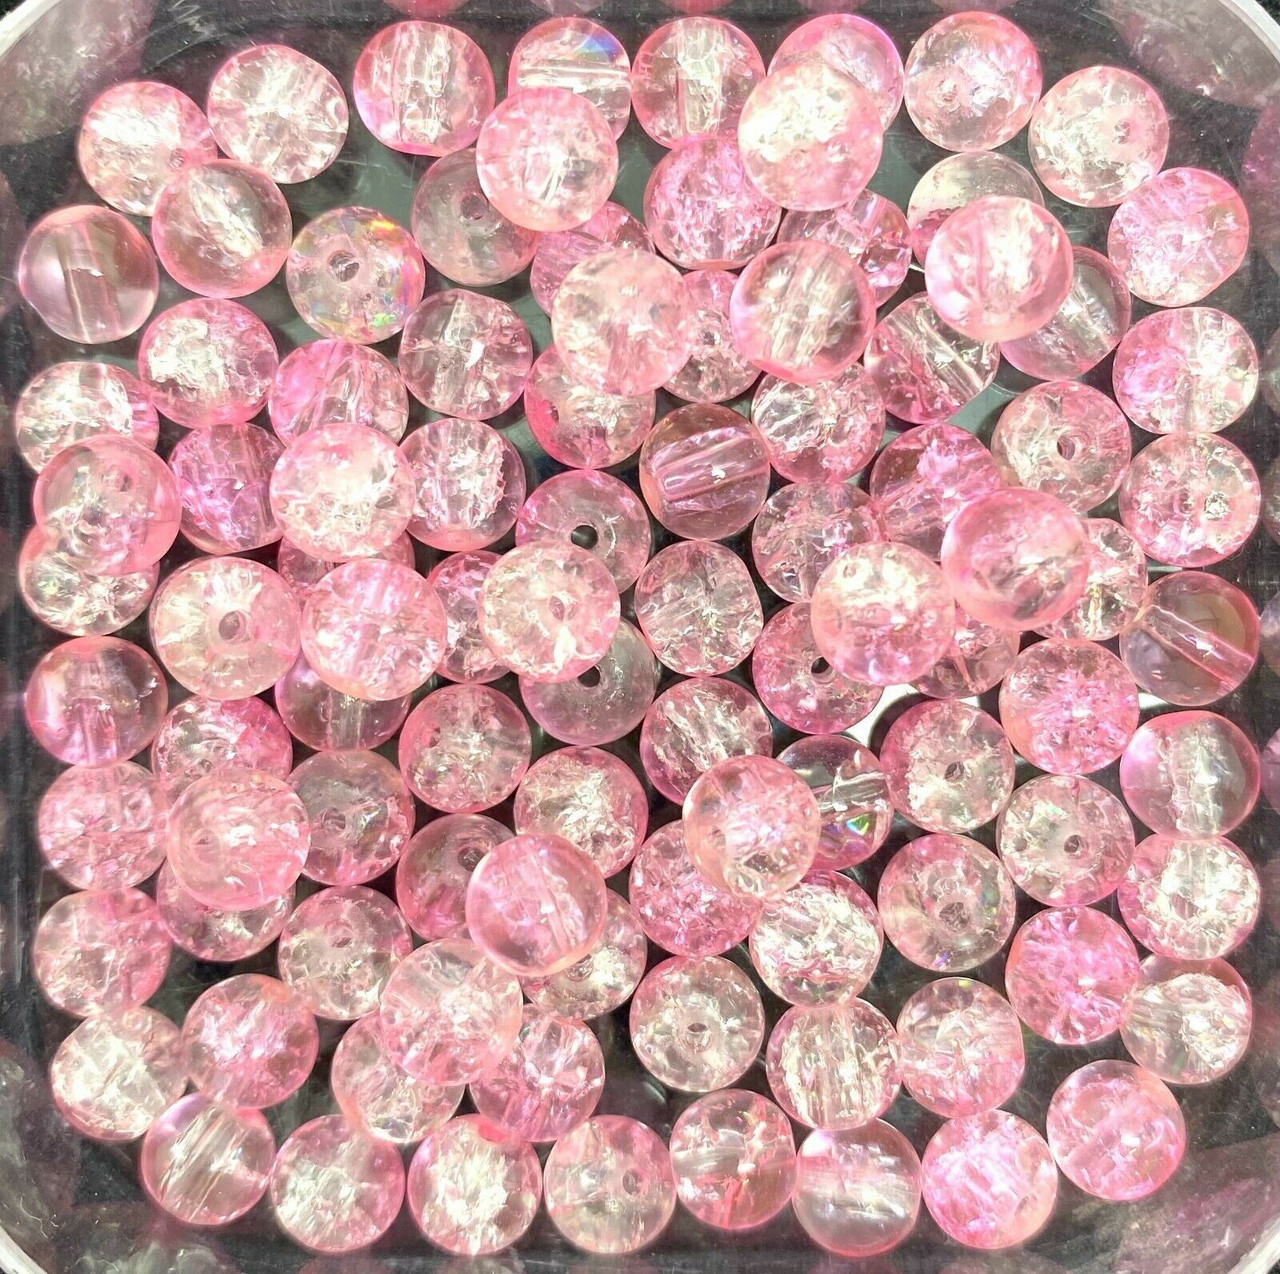 4mm Crackle Glass Beads - Pink & Clear, 200 beads